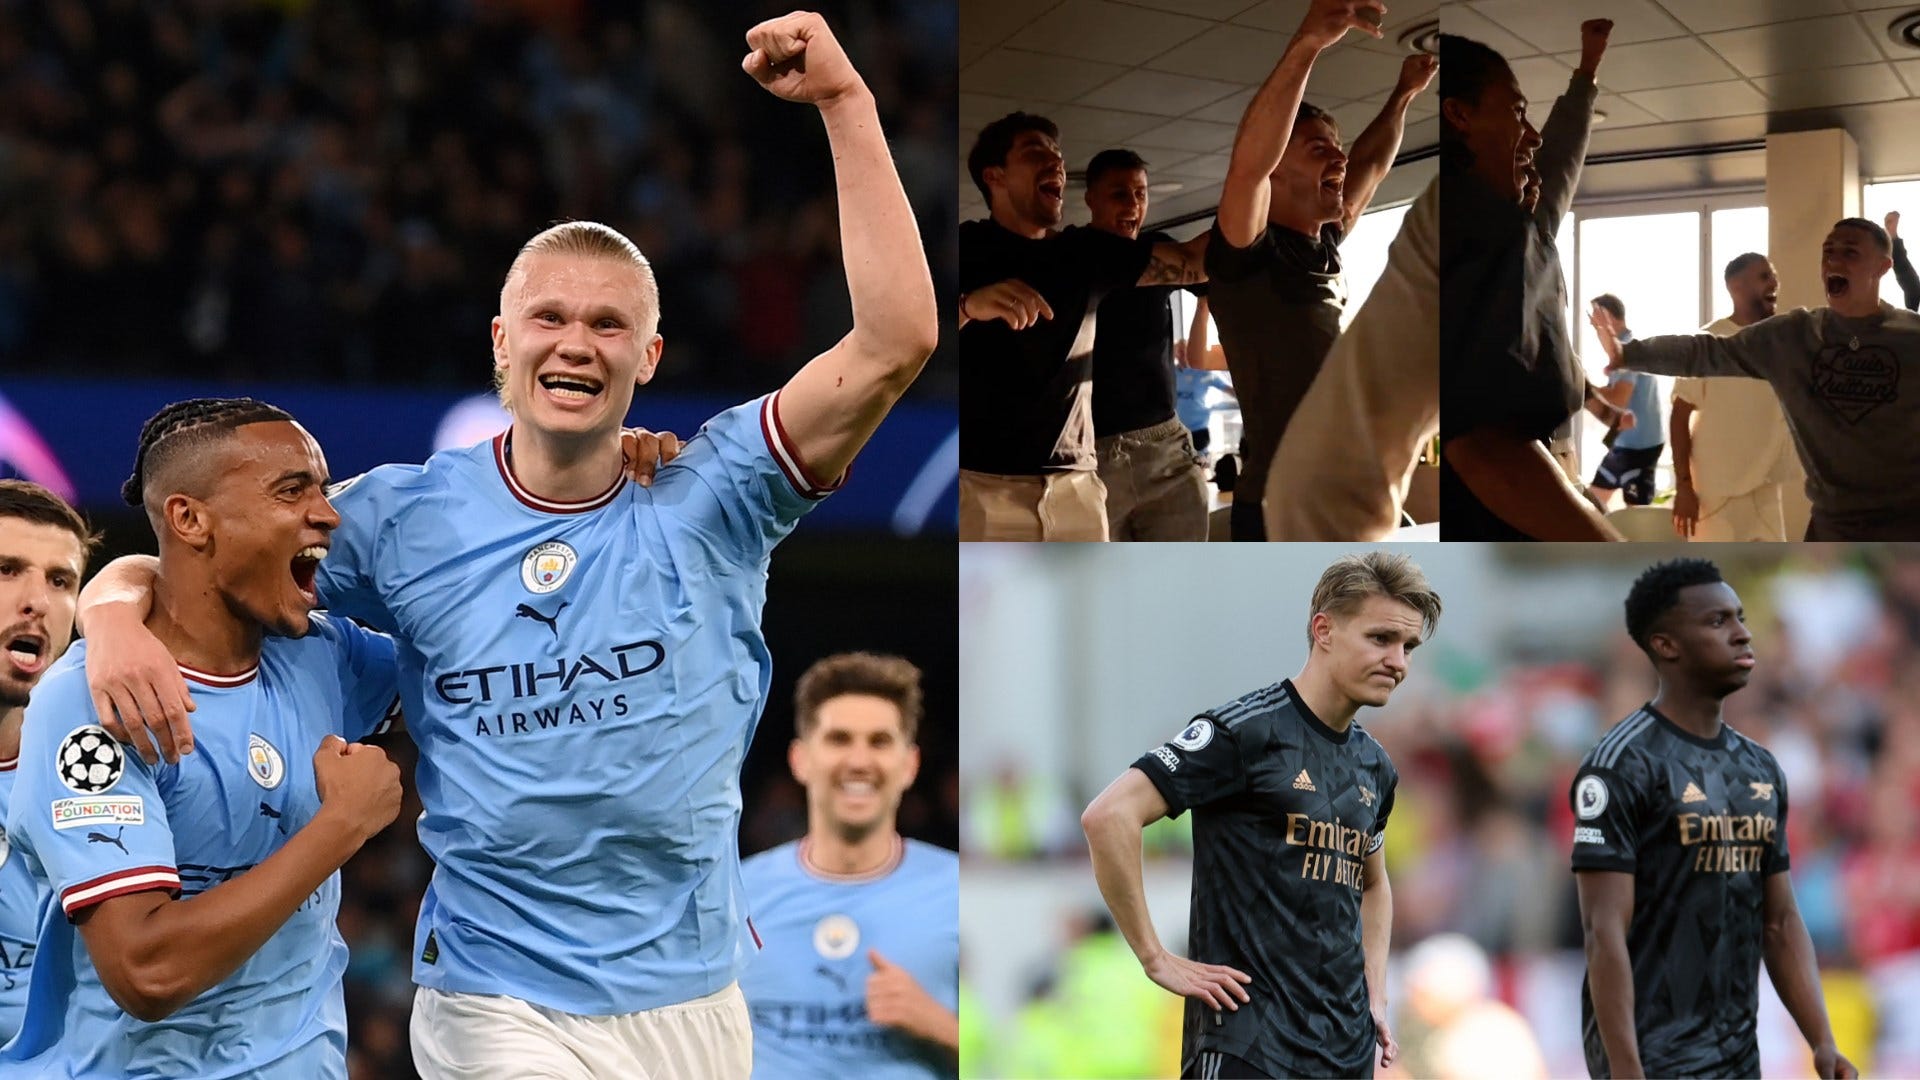 WATCH Man City players go crazy as they find out they are Premier League champions following Arsenals defeat at Forest Goal US